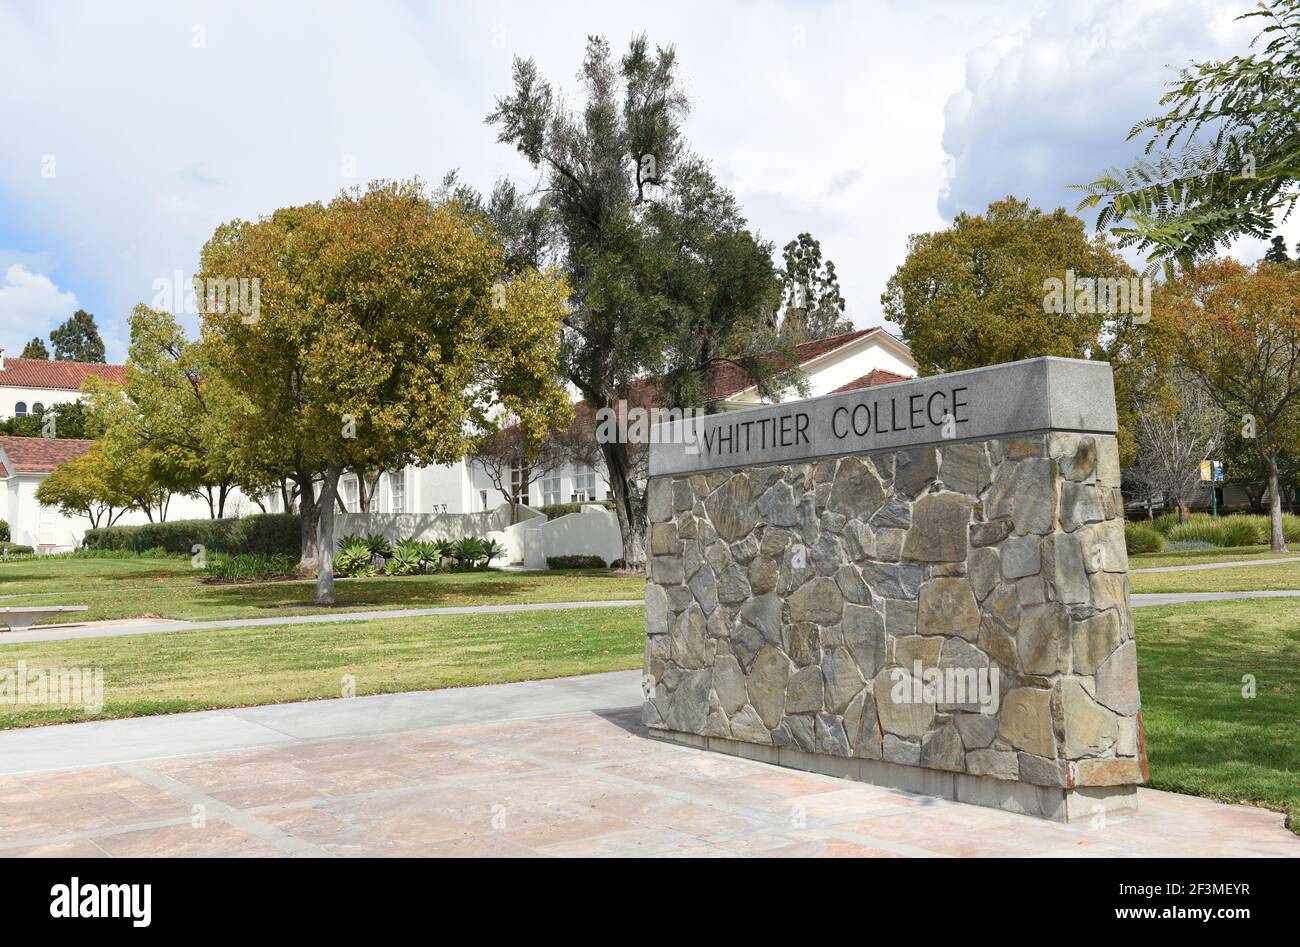 WHITTIER, CALIFORNIA 12 MAR 2021: Whittier College Sign at the Lower Quad on the Campus of the Liberal Arts school. Stock Photo